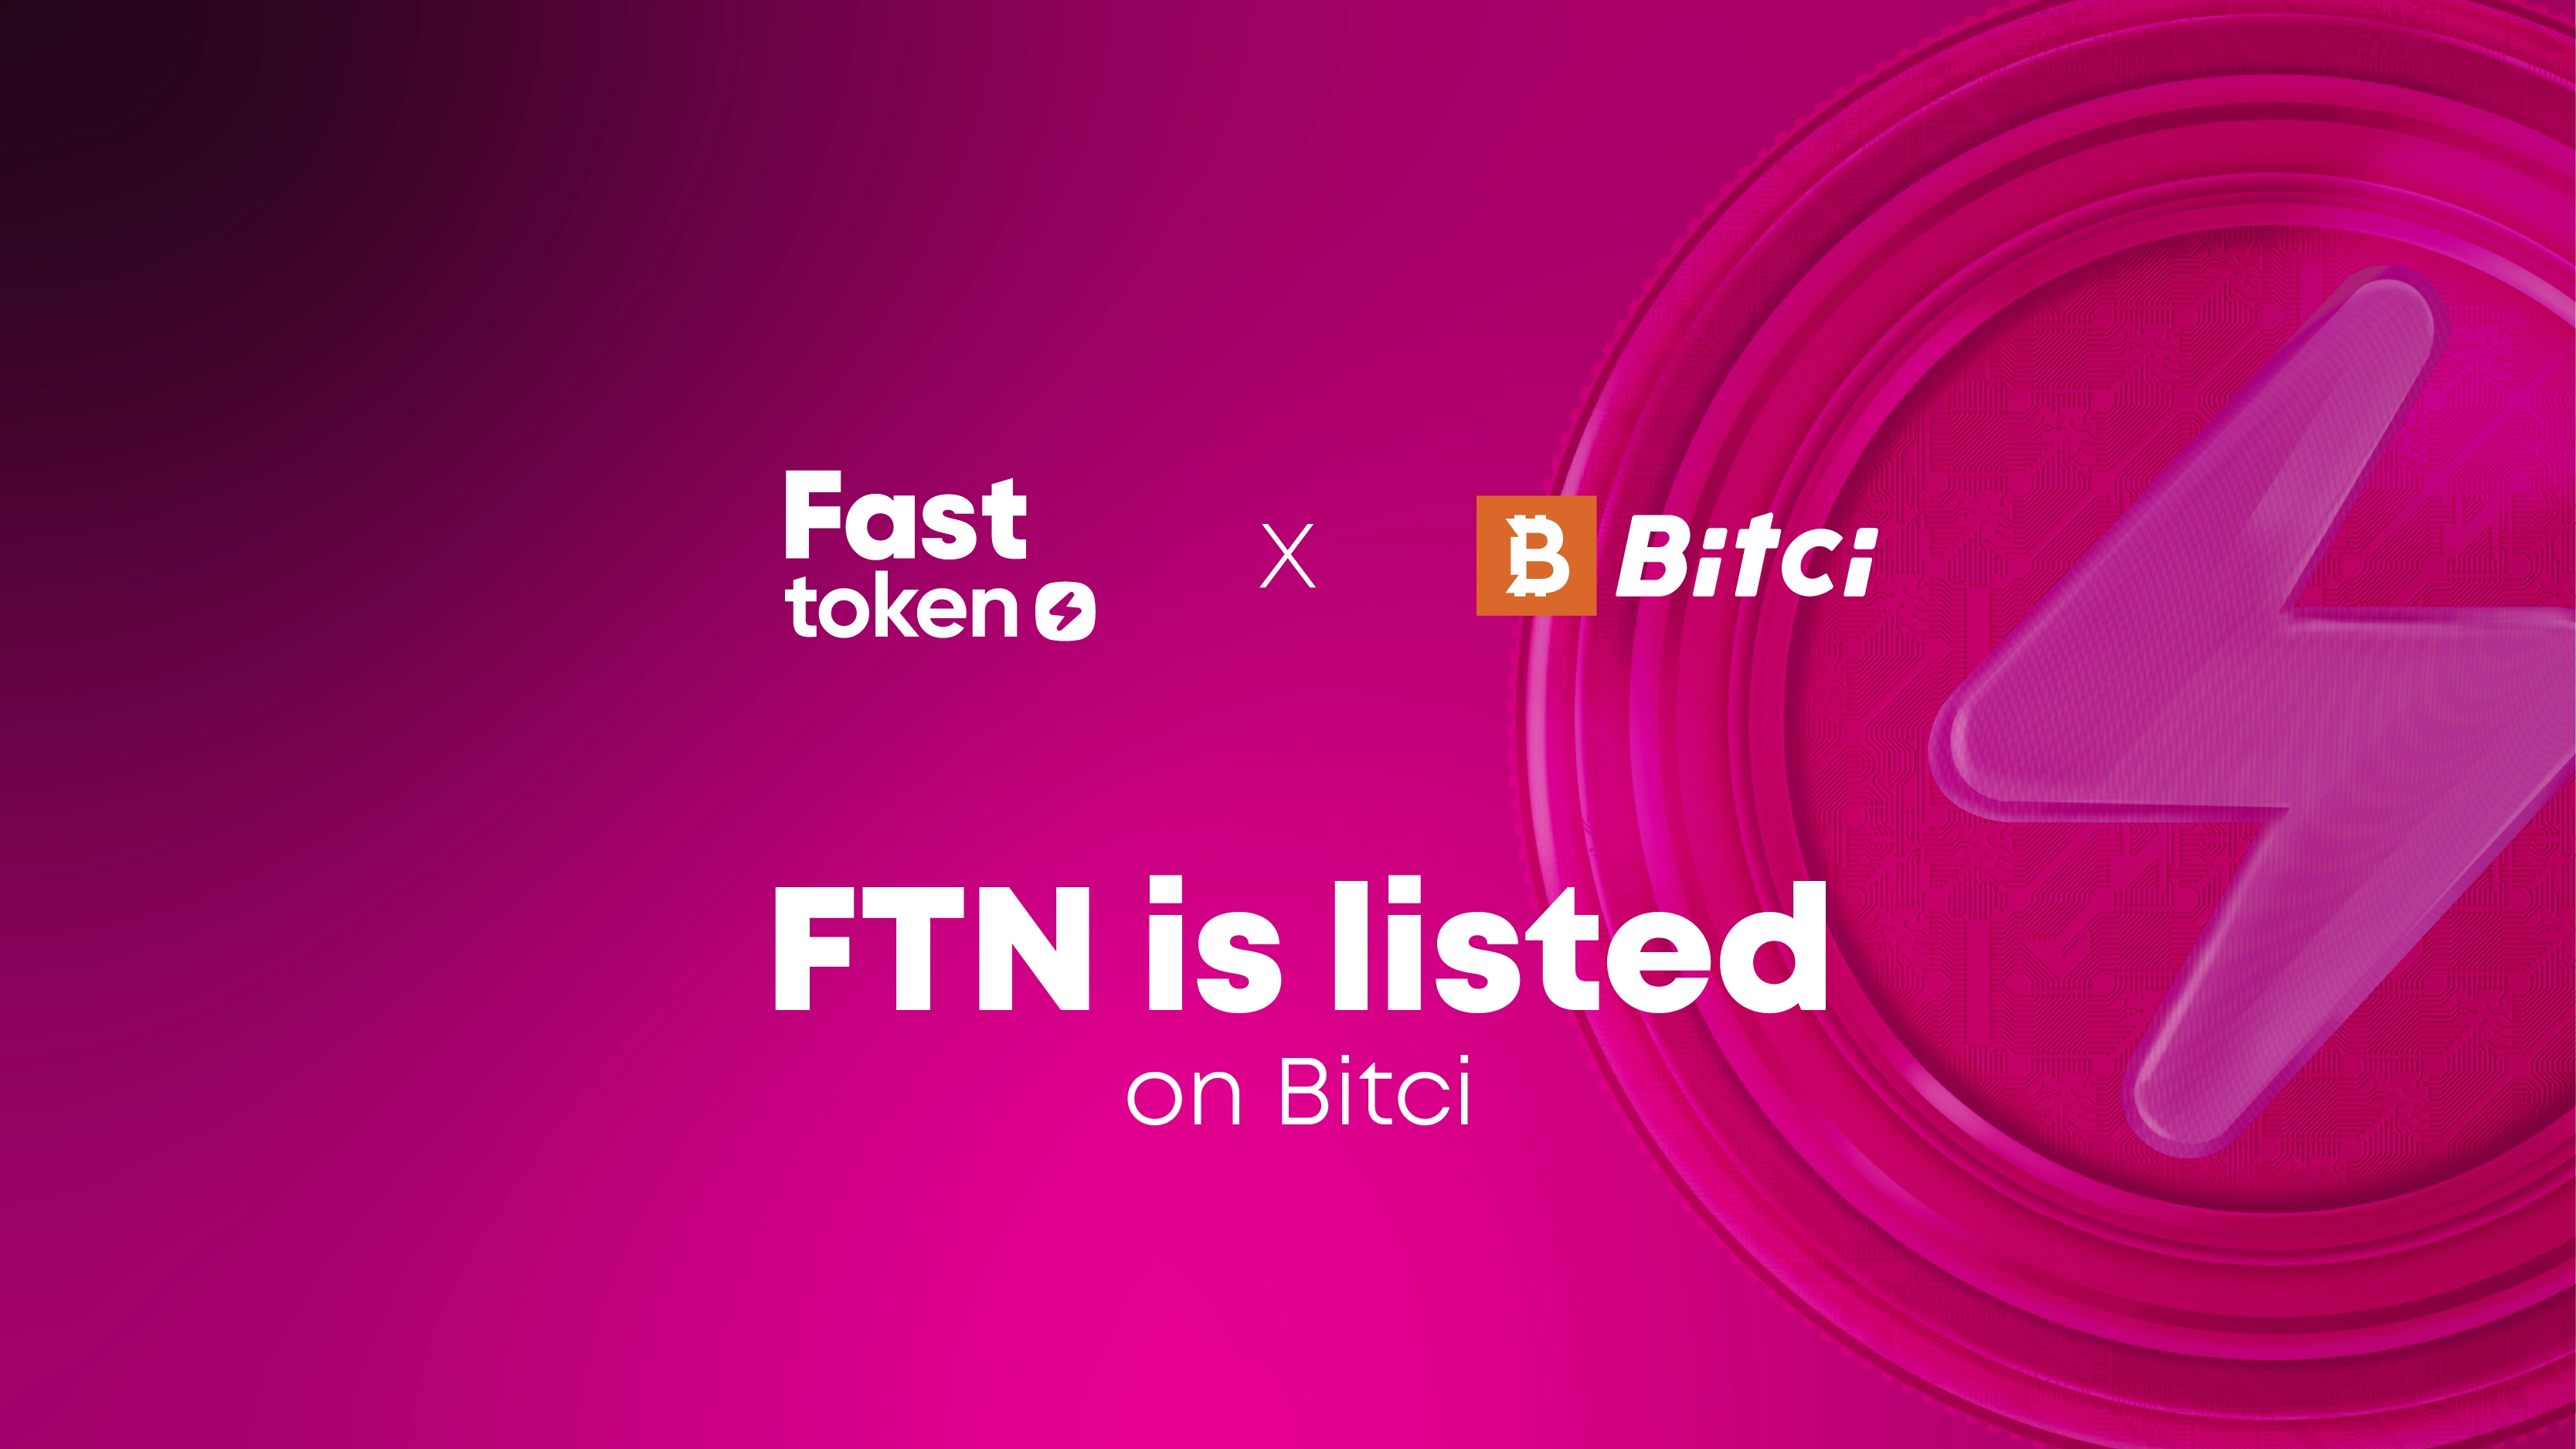 Fasttoken (FTN) Now Listed on Bitci